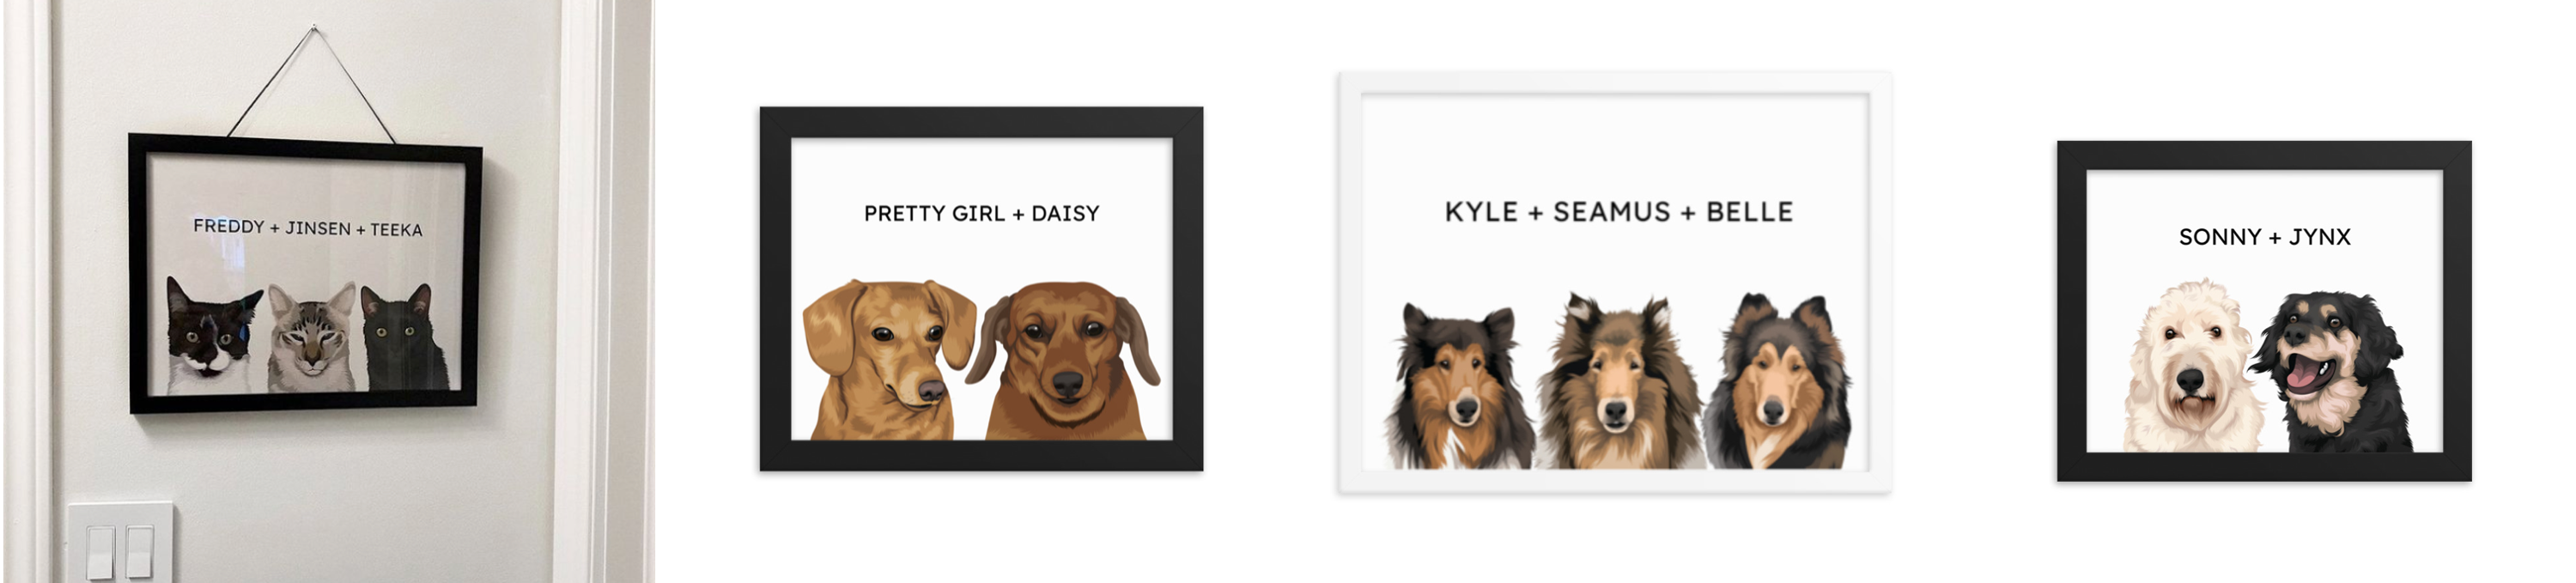 Pet Owner New Home Print,Housewarming,Christmas,AnniversaryFamily Portrait V2 UNFRAMED Available in 5x7,A5,8x10,A4,A3 Couples Print Pet portrait